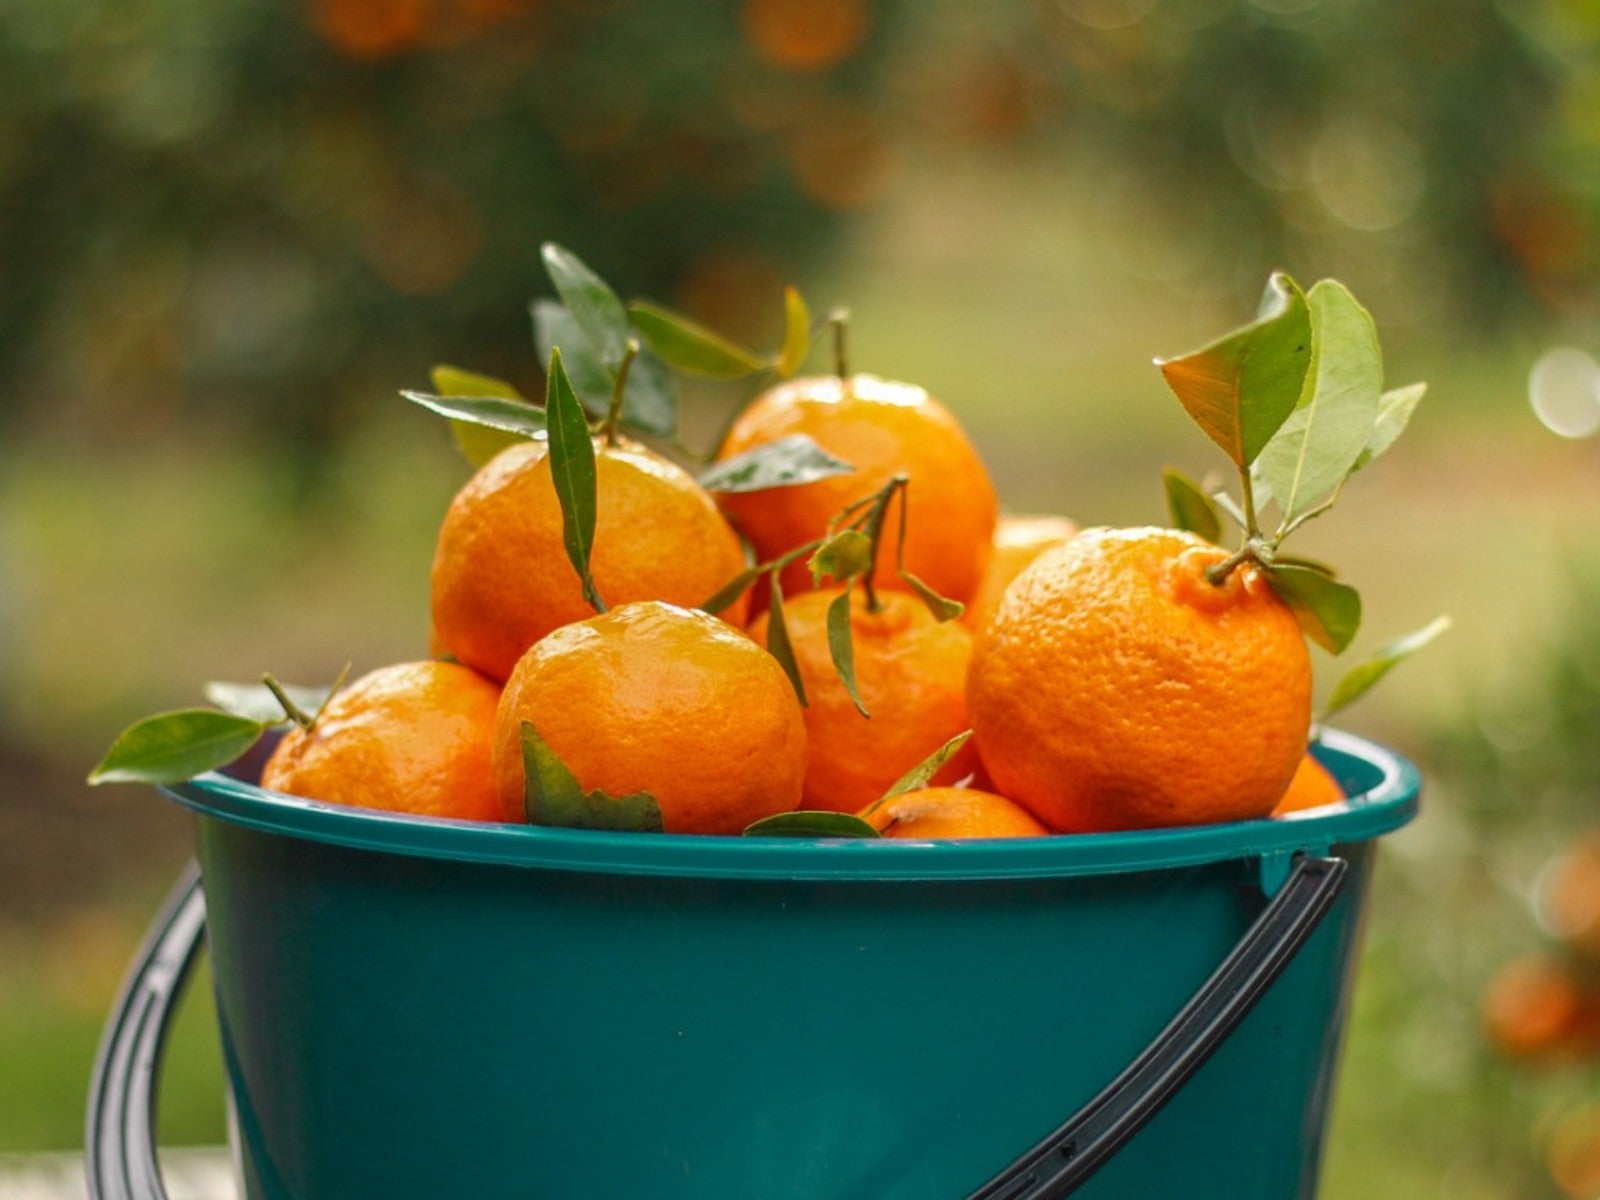 Clementines Tangerines Information and Facts